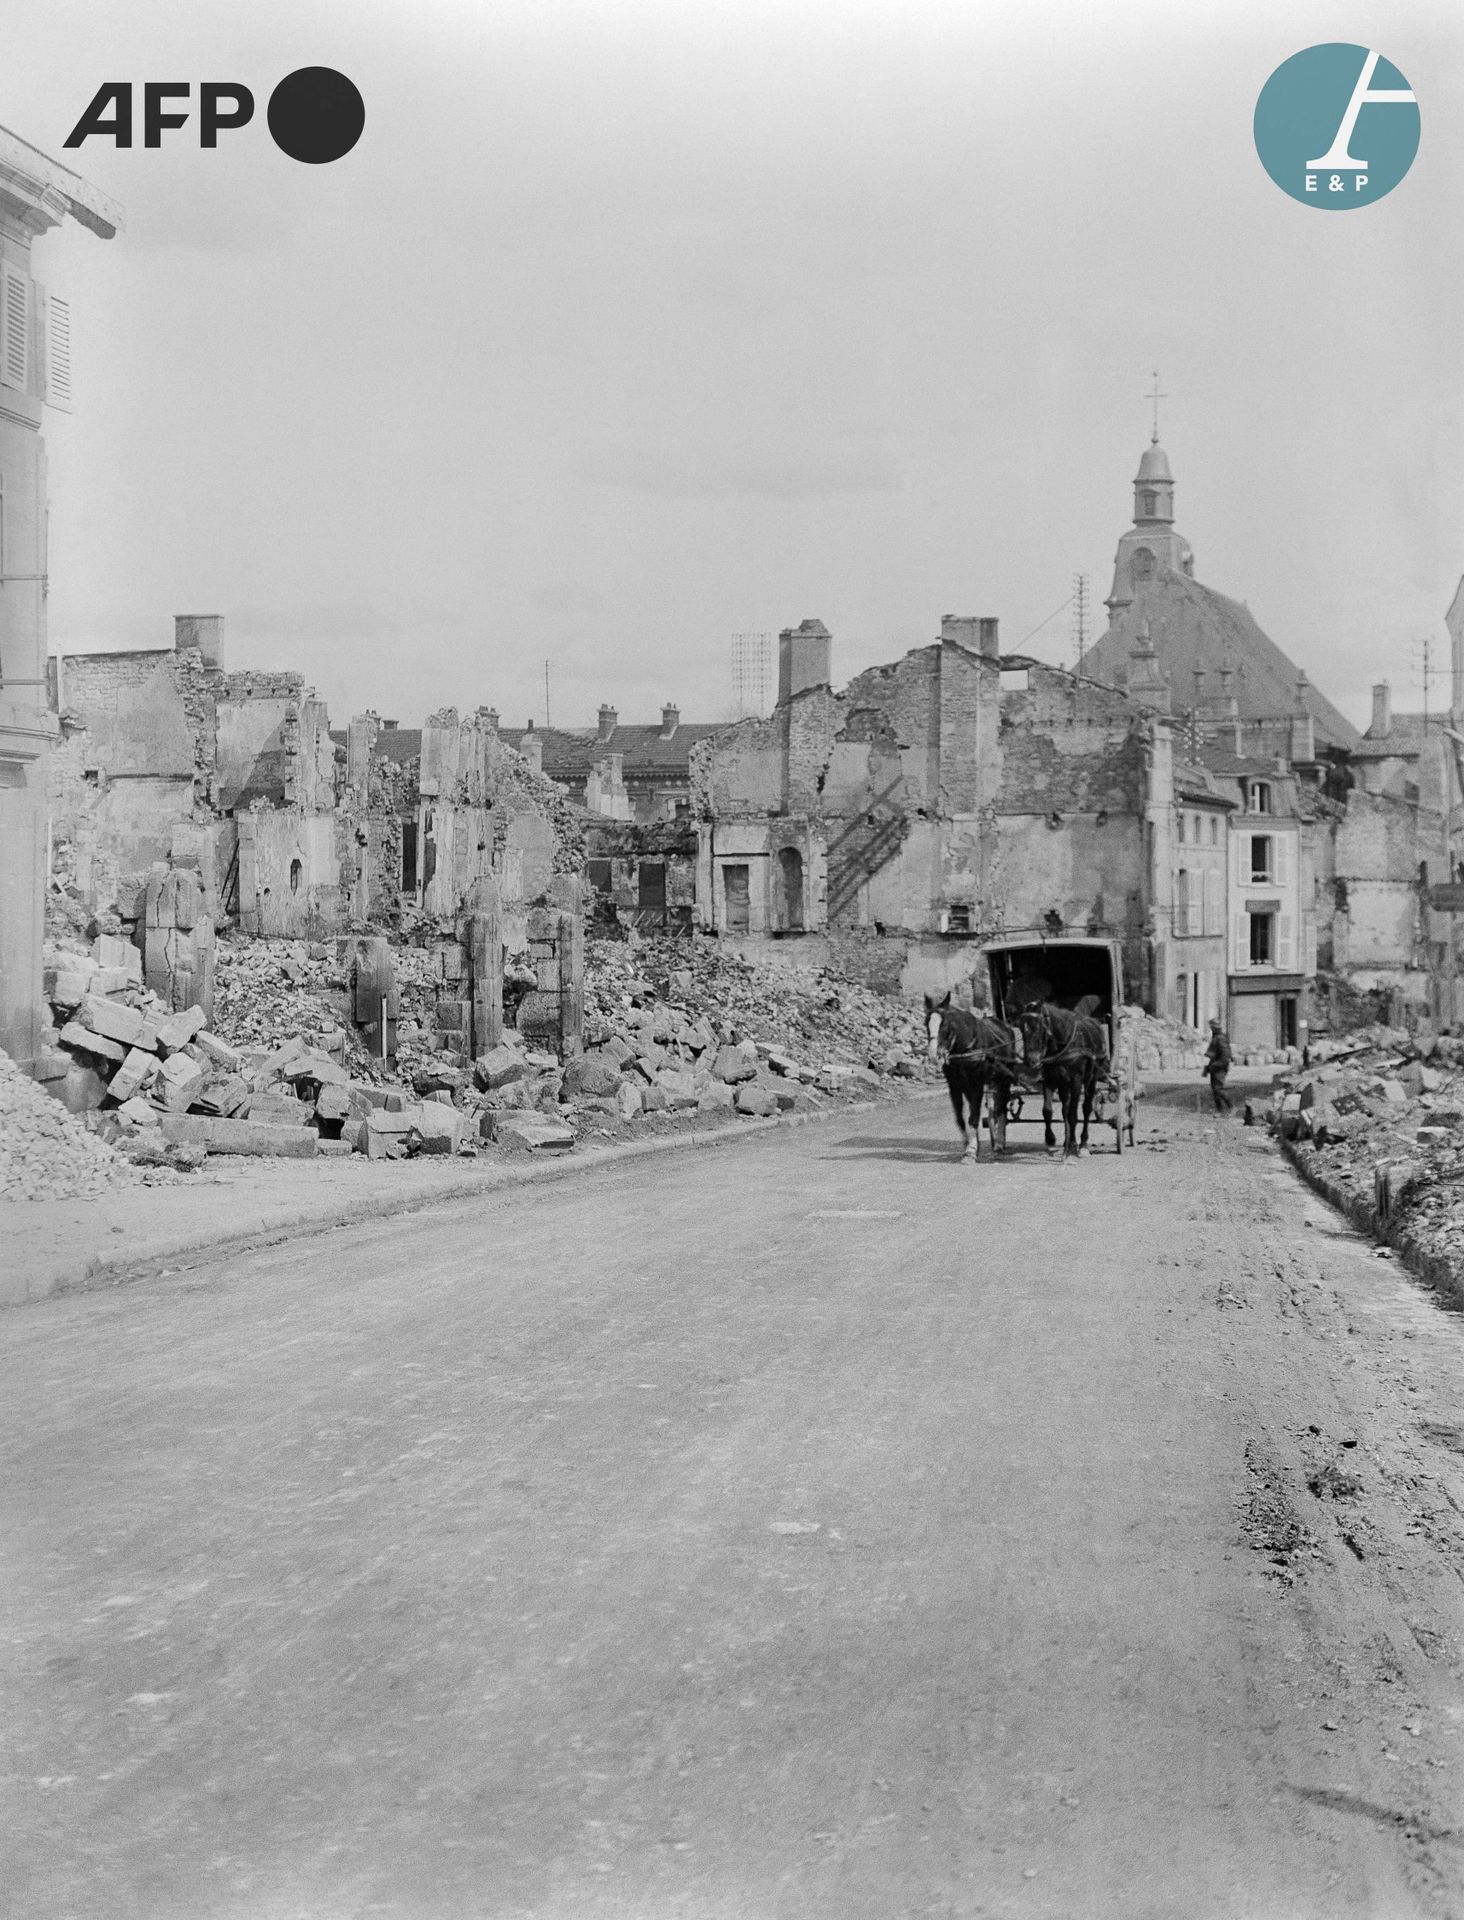 Null AFP

The ruined town of Verdun, photographed by a soldier. First World War,&hellip;